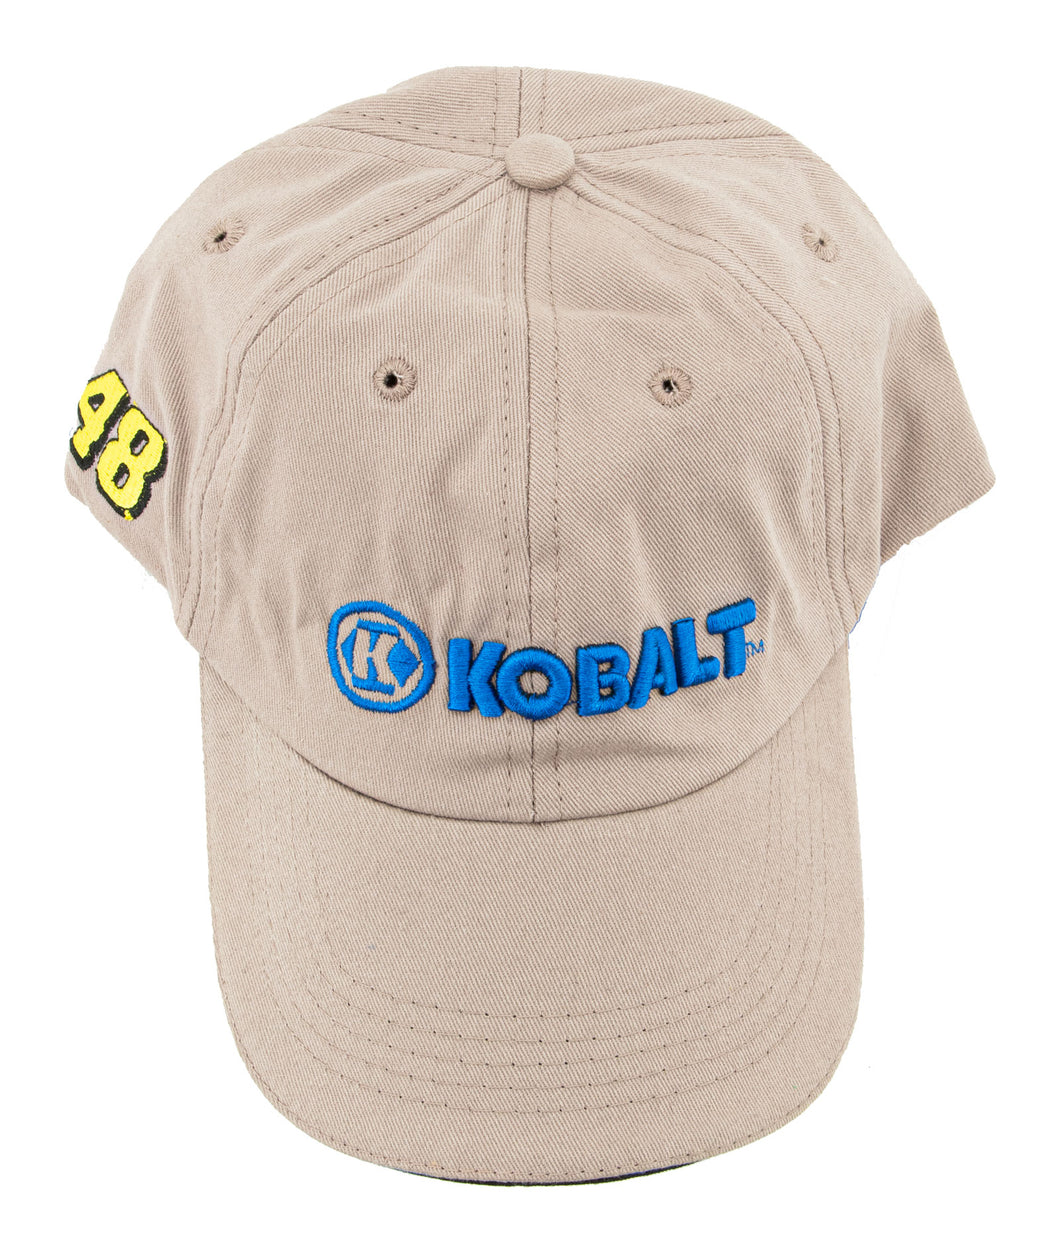 Lowe's Kobalt Brand Embroidered Ball Cap, One Size Fits All